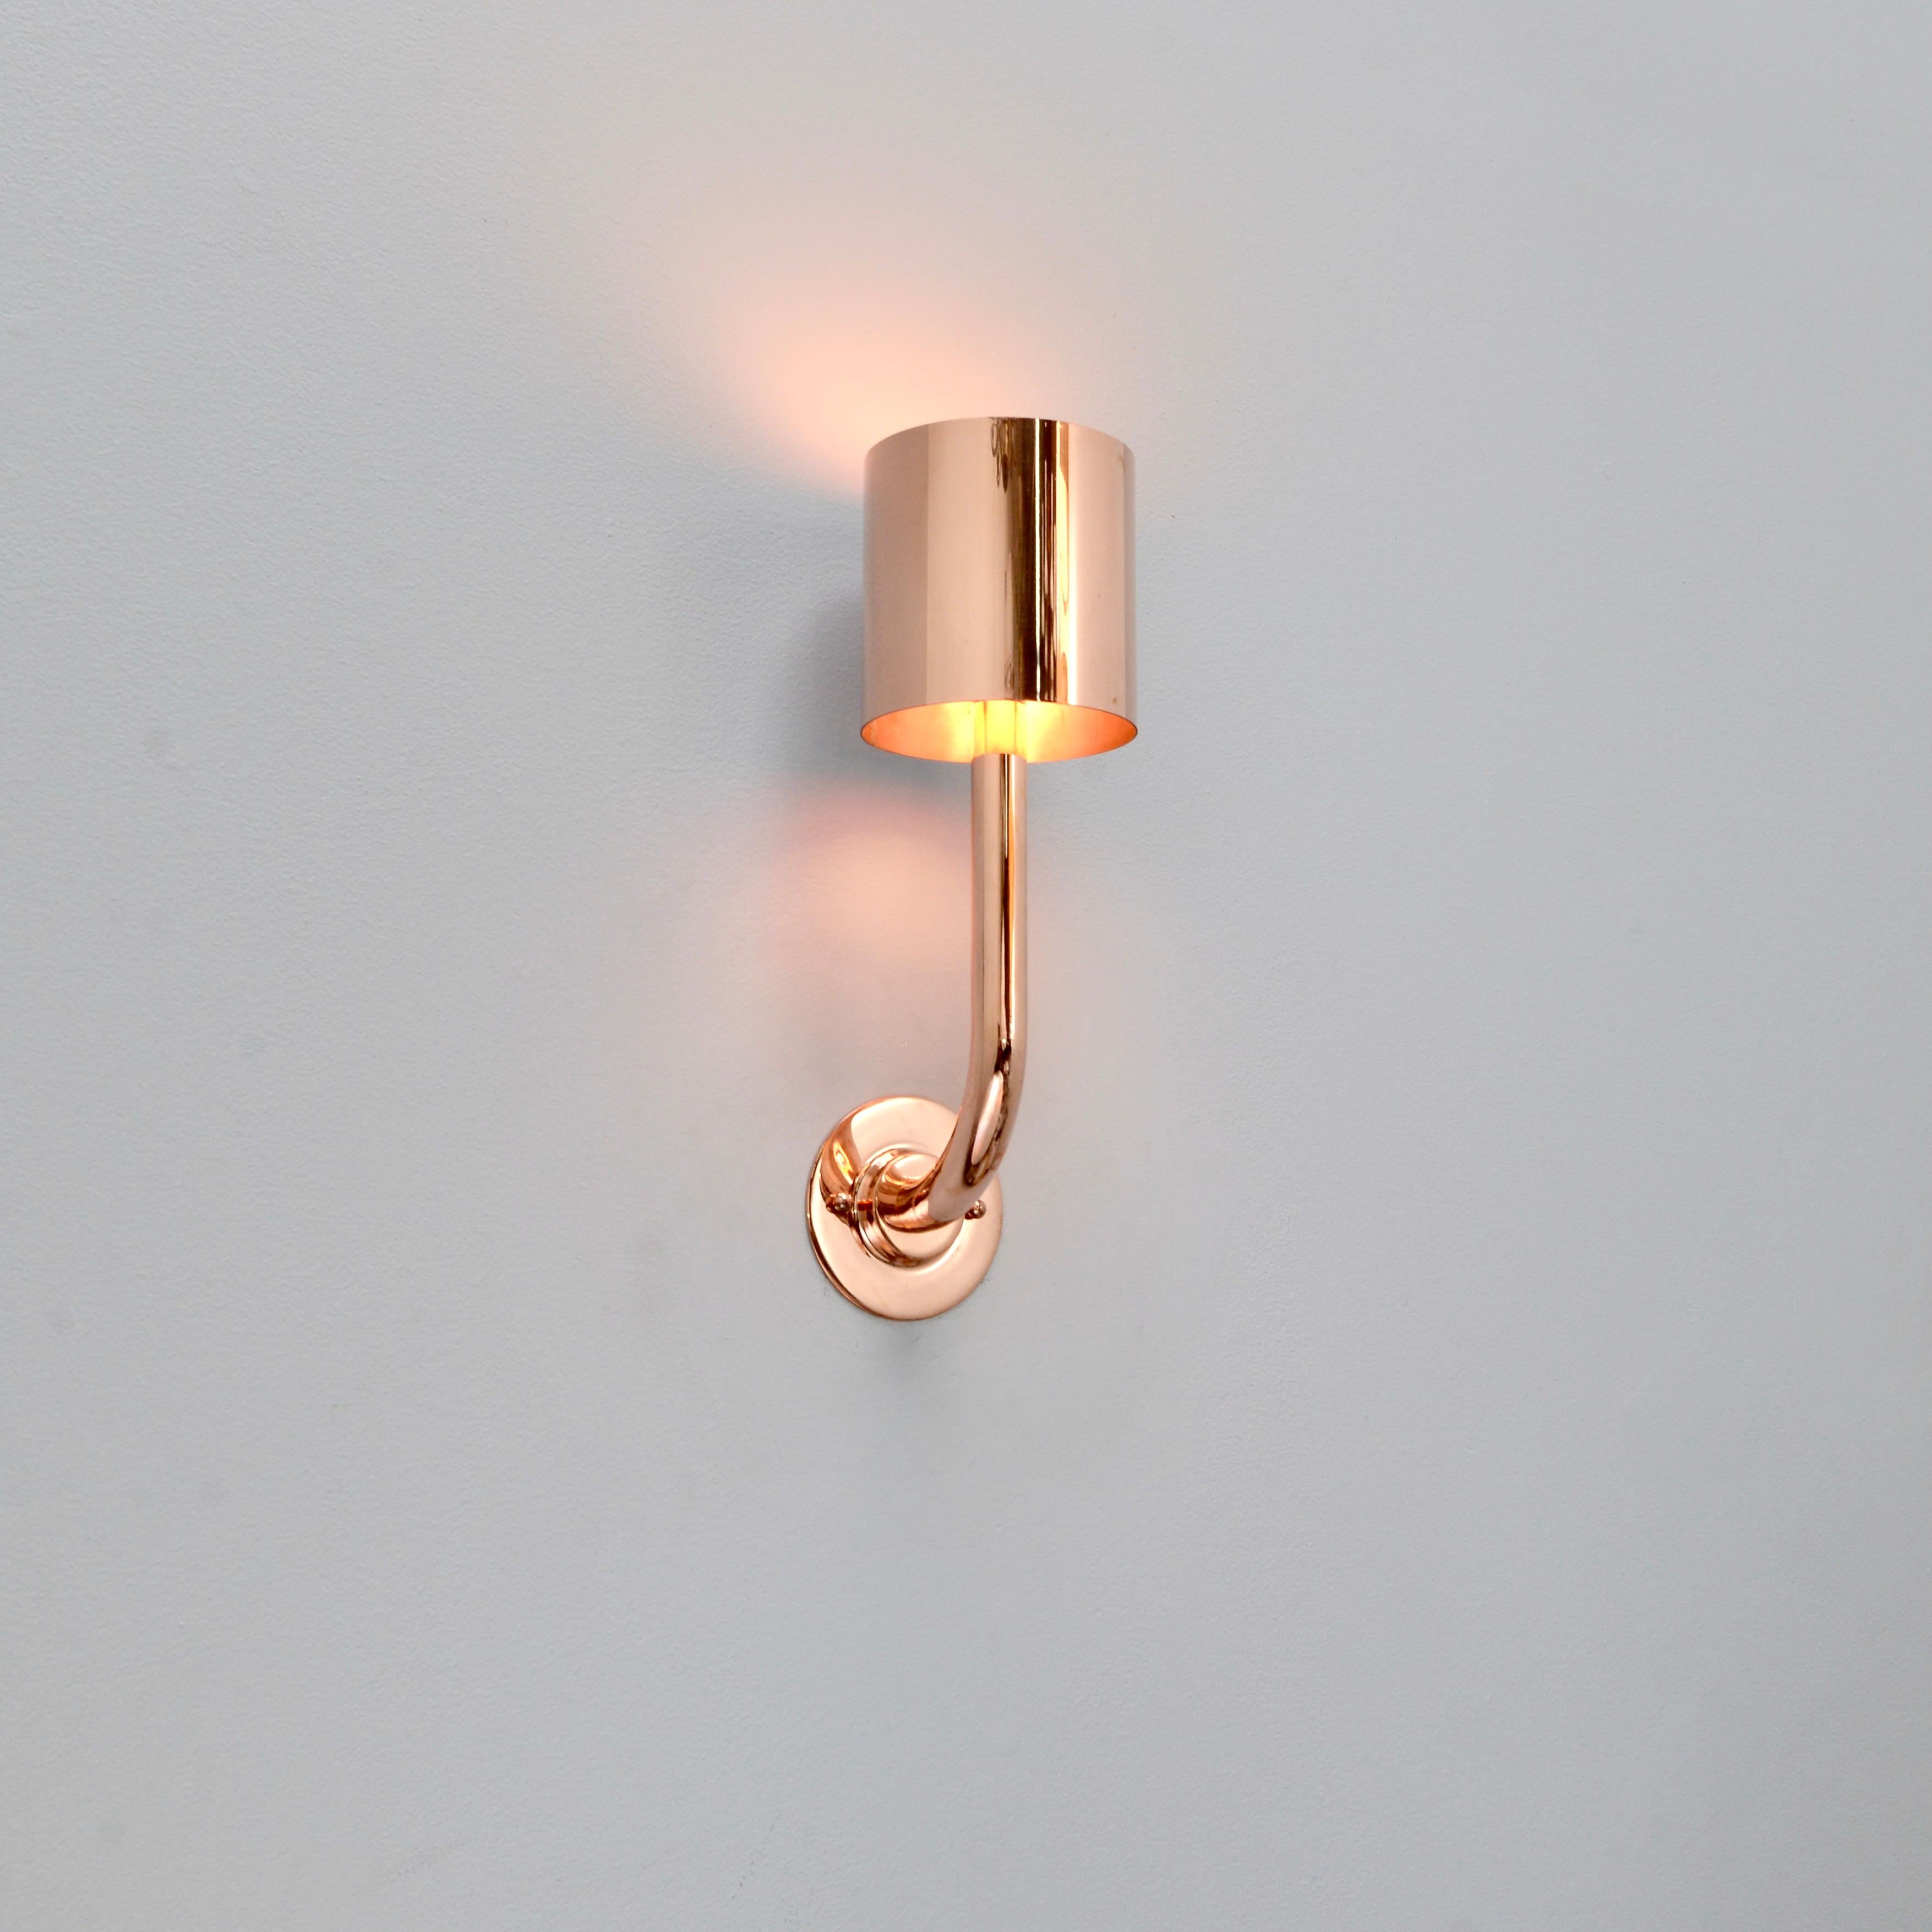 Stunning copper M LRS wall sconce. Made from all polished unlacquered copper including the shade, manufactured by Lumfardo Luminaires. Made contemporary in the US. Wired with an E-12 candelabra based socket. Multiples available for order. Can be